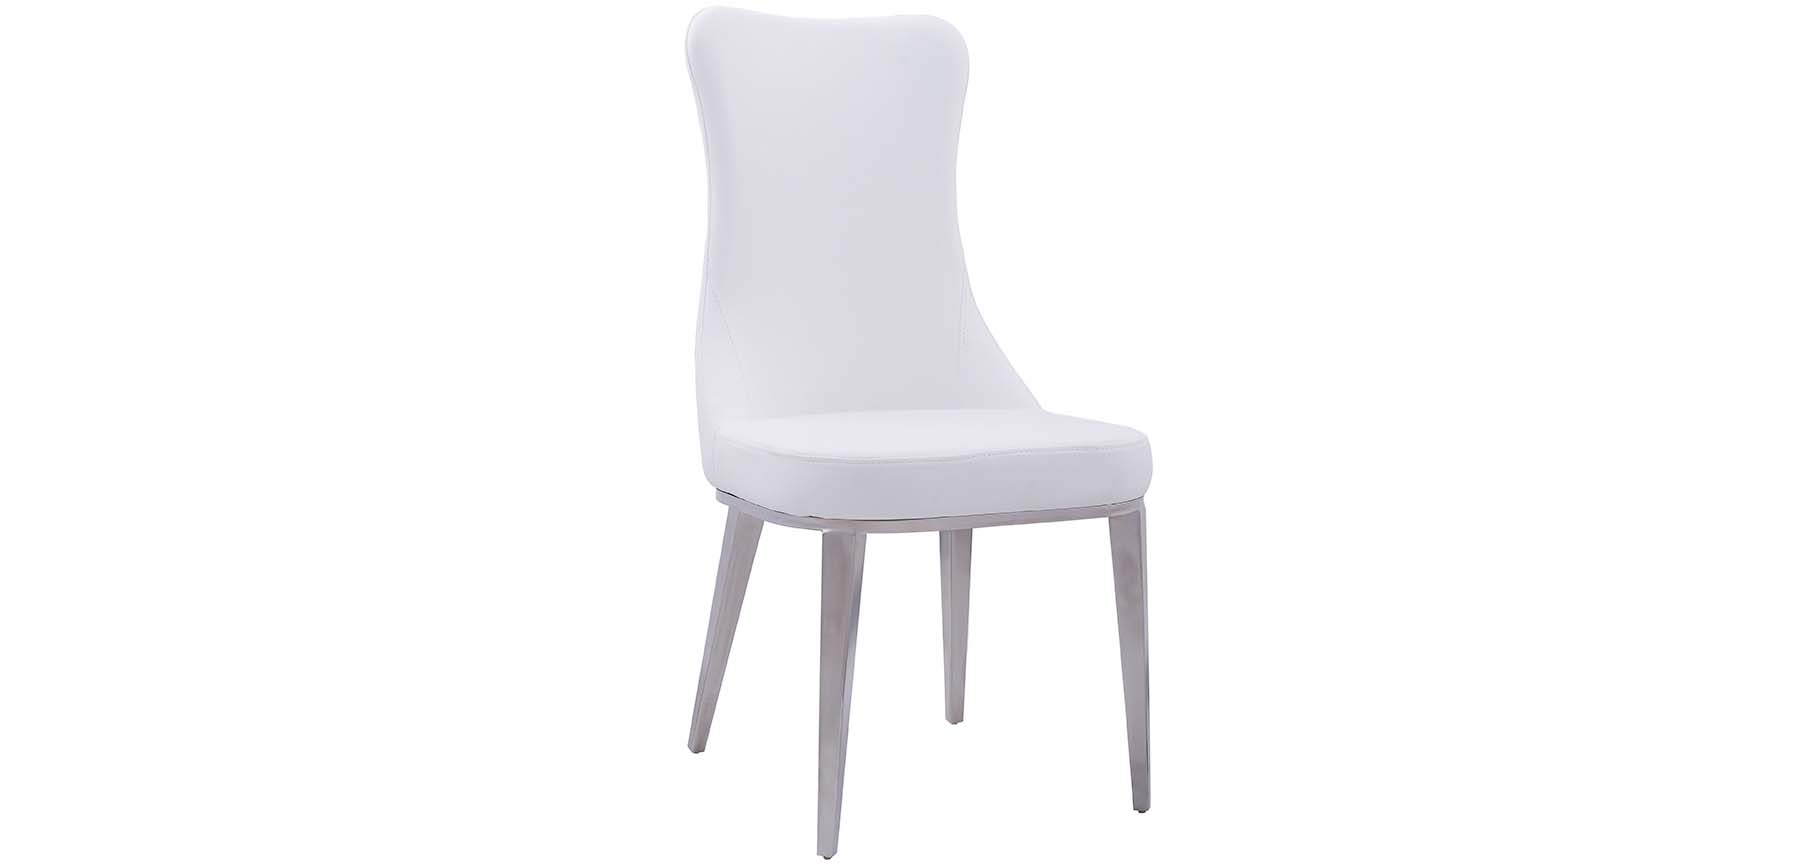 Dining Room Furniture Marble-Look Tables 6138 Solid White (no pattern) Chair